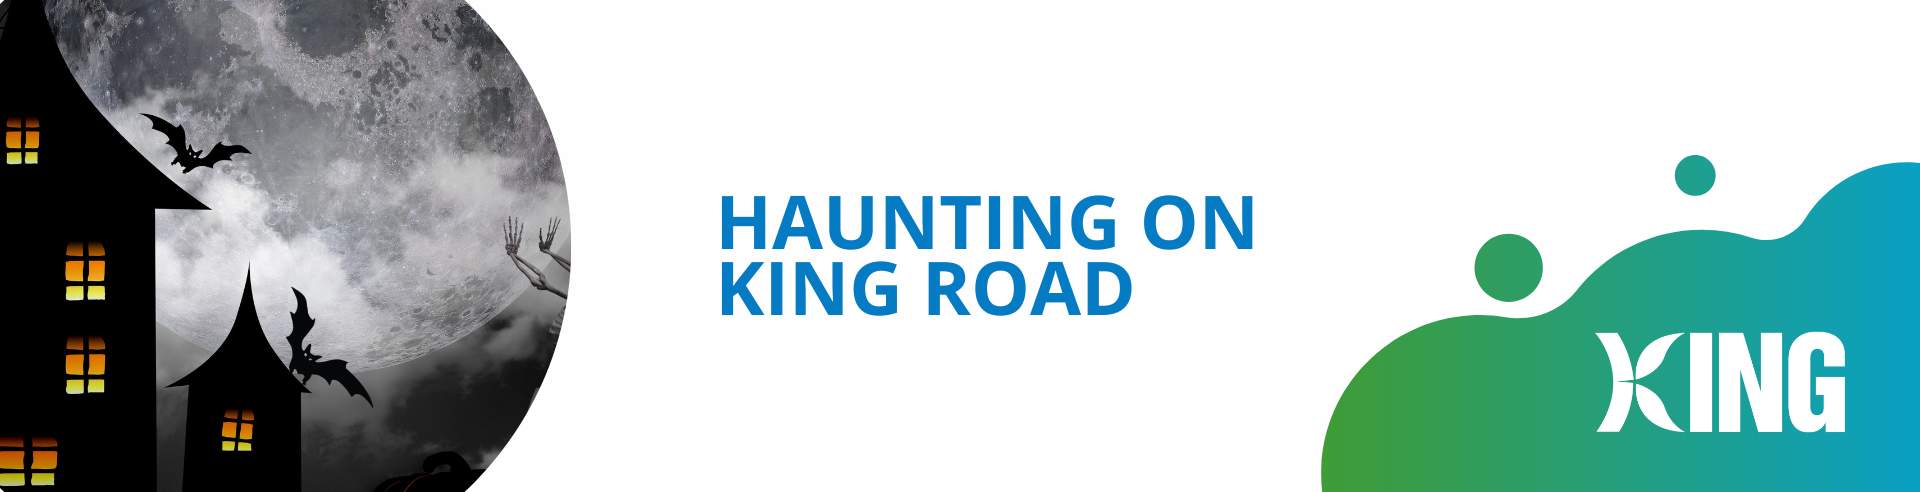 Haunting on King Road